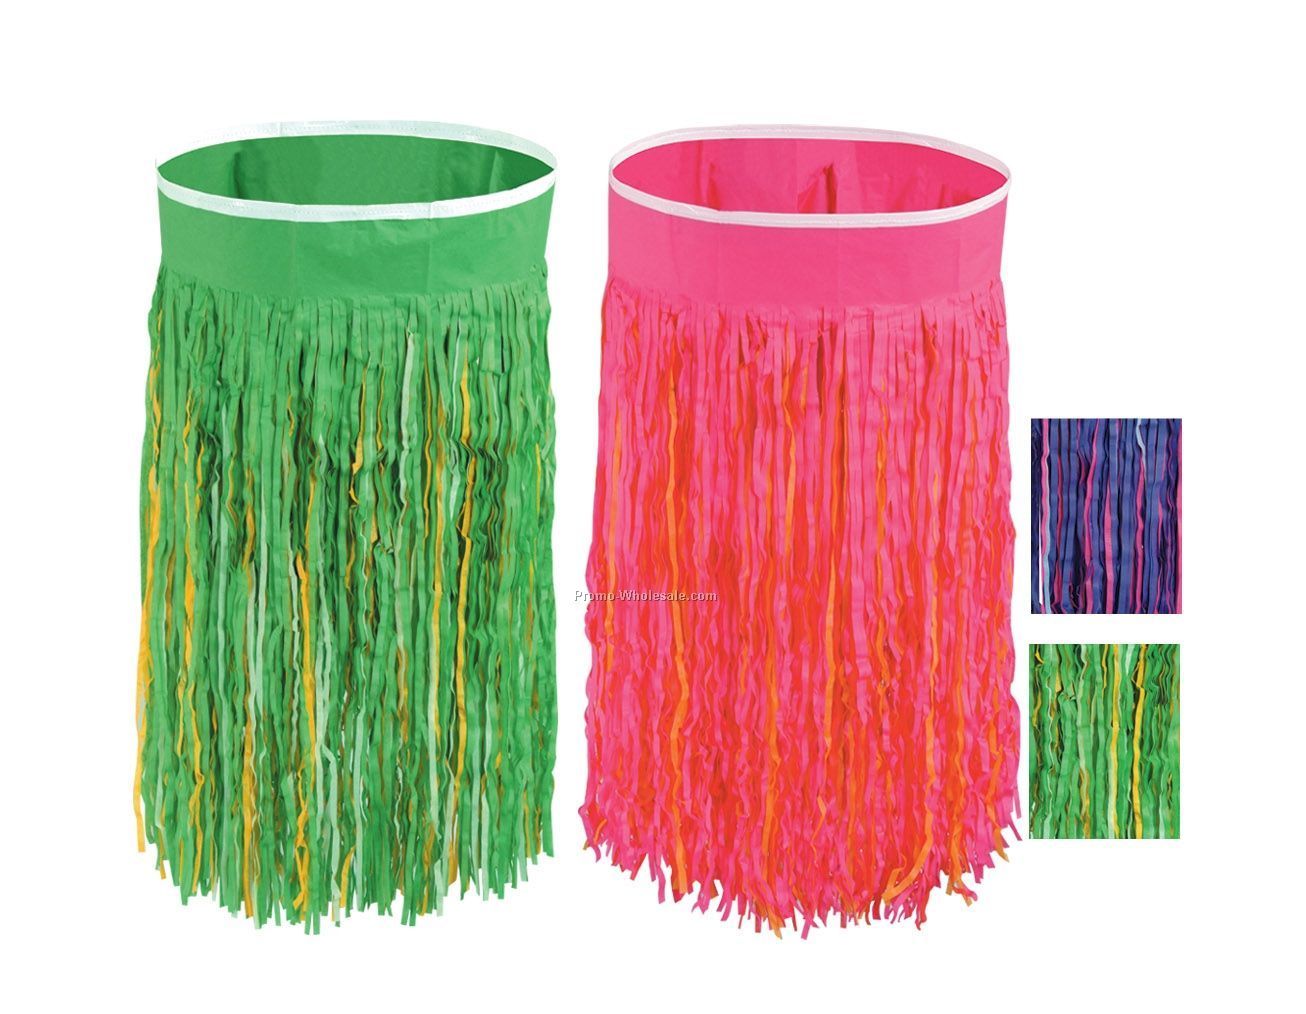 Assorted Color 6 Ply Flameproof Tissue Hula Skirt (36"x36")